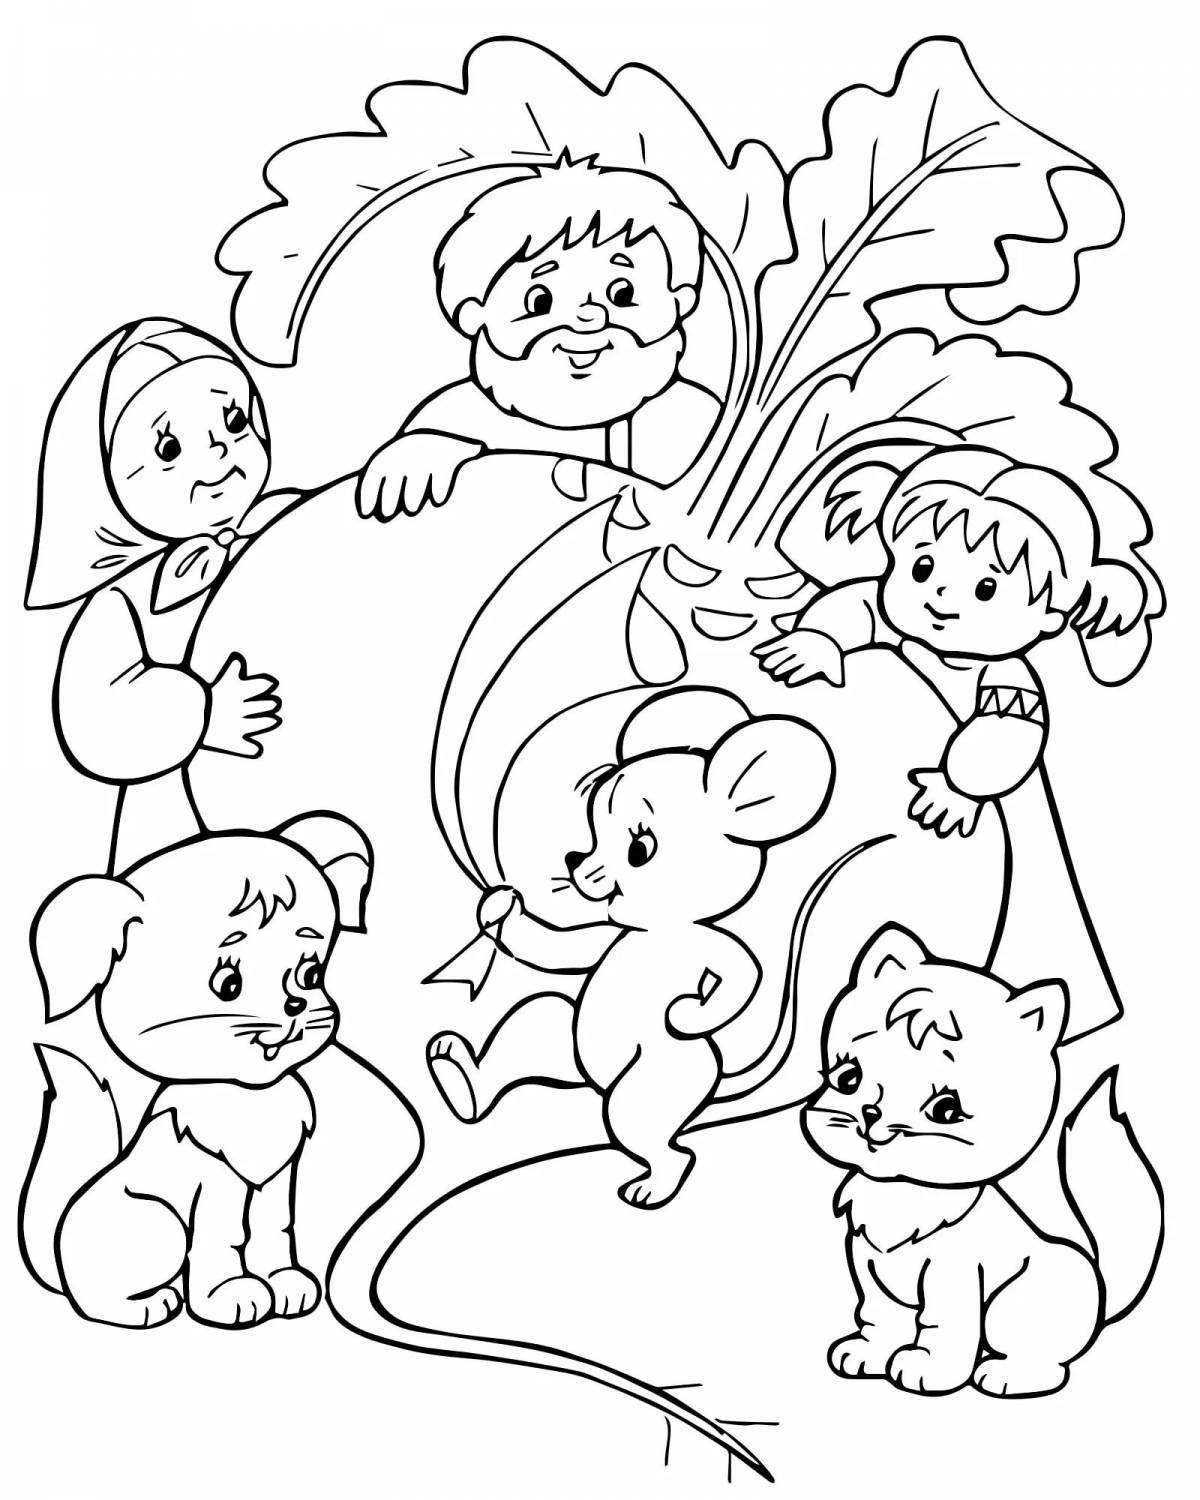 A living fairy tale coloring book for preschoolers